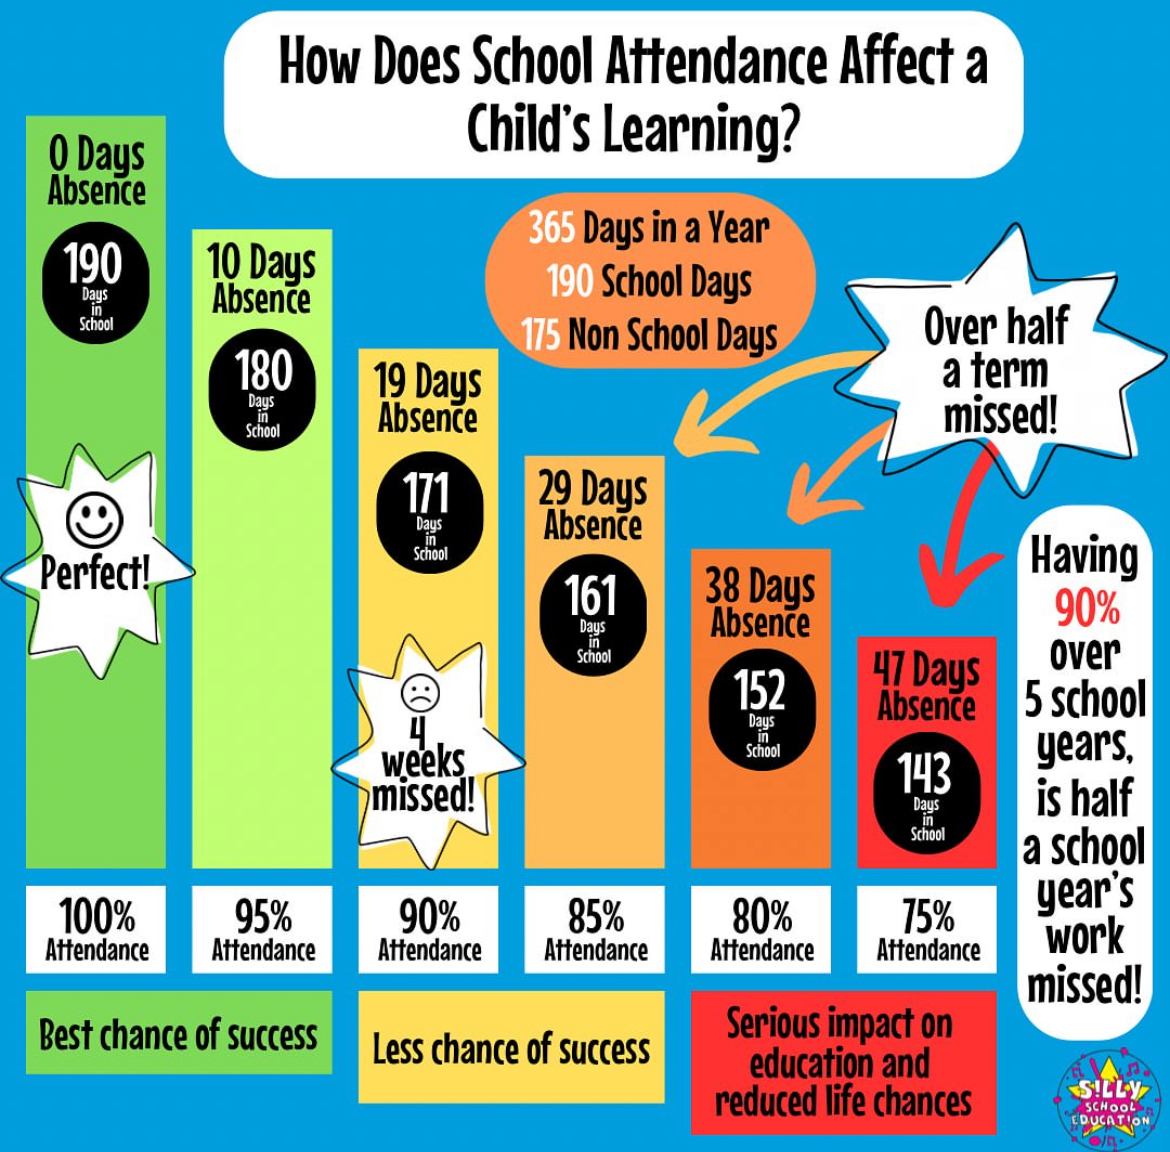 How does attendance affect a child's learning?